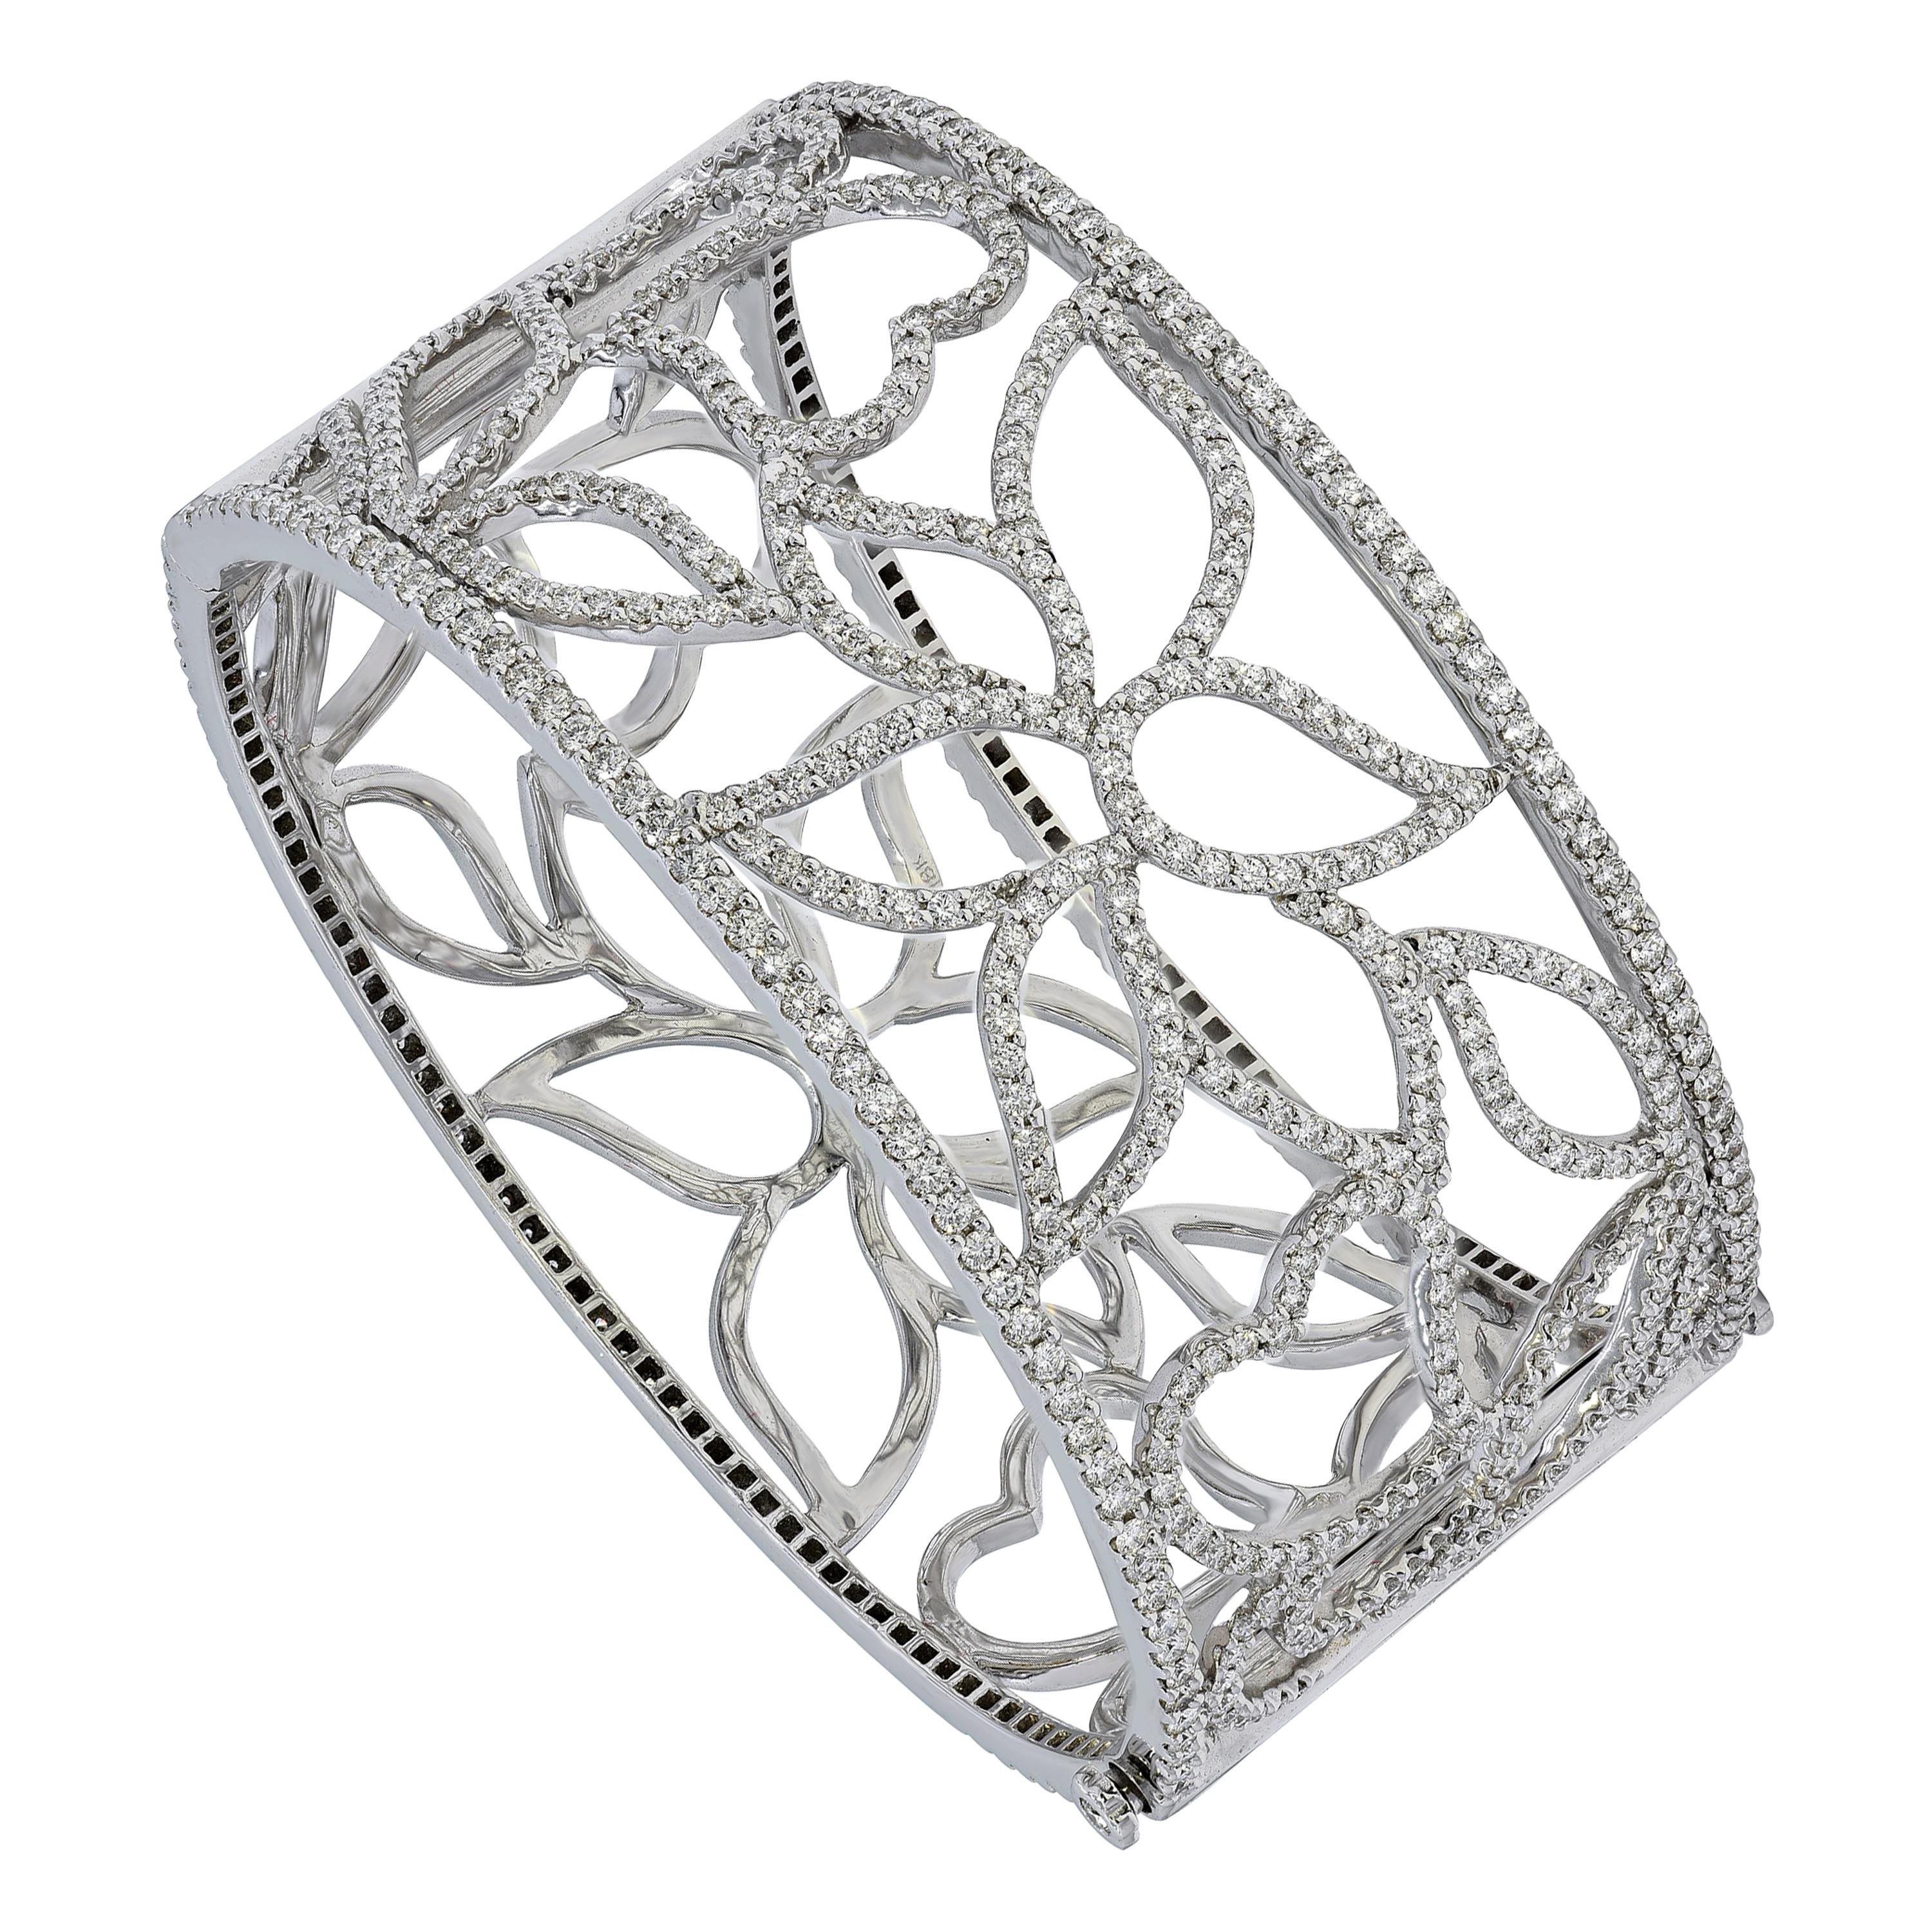 18kt White Gold Cuff Bracelet with 5.78ct Diamonds, 2 Sided Wearable For Sale